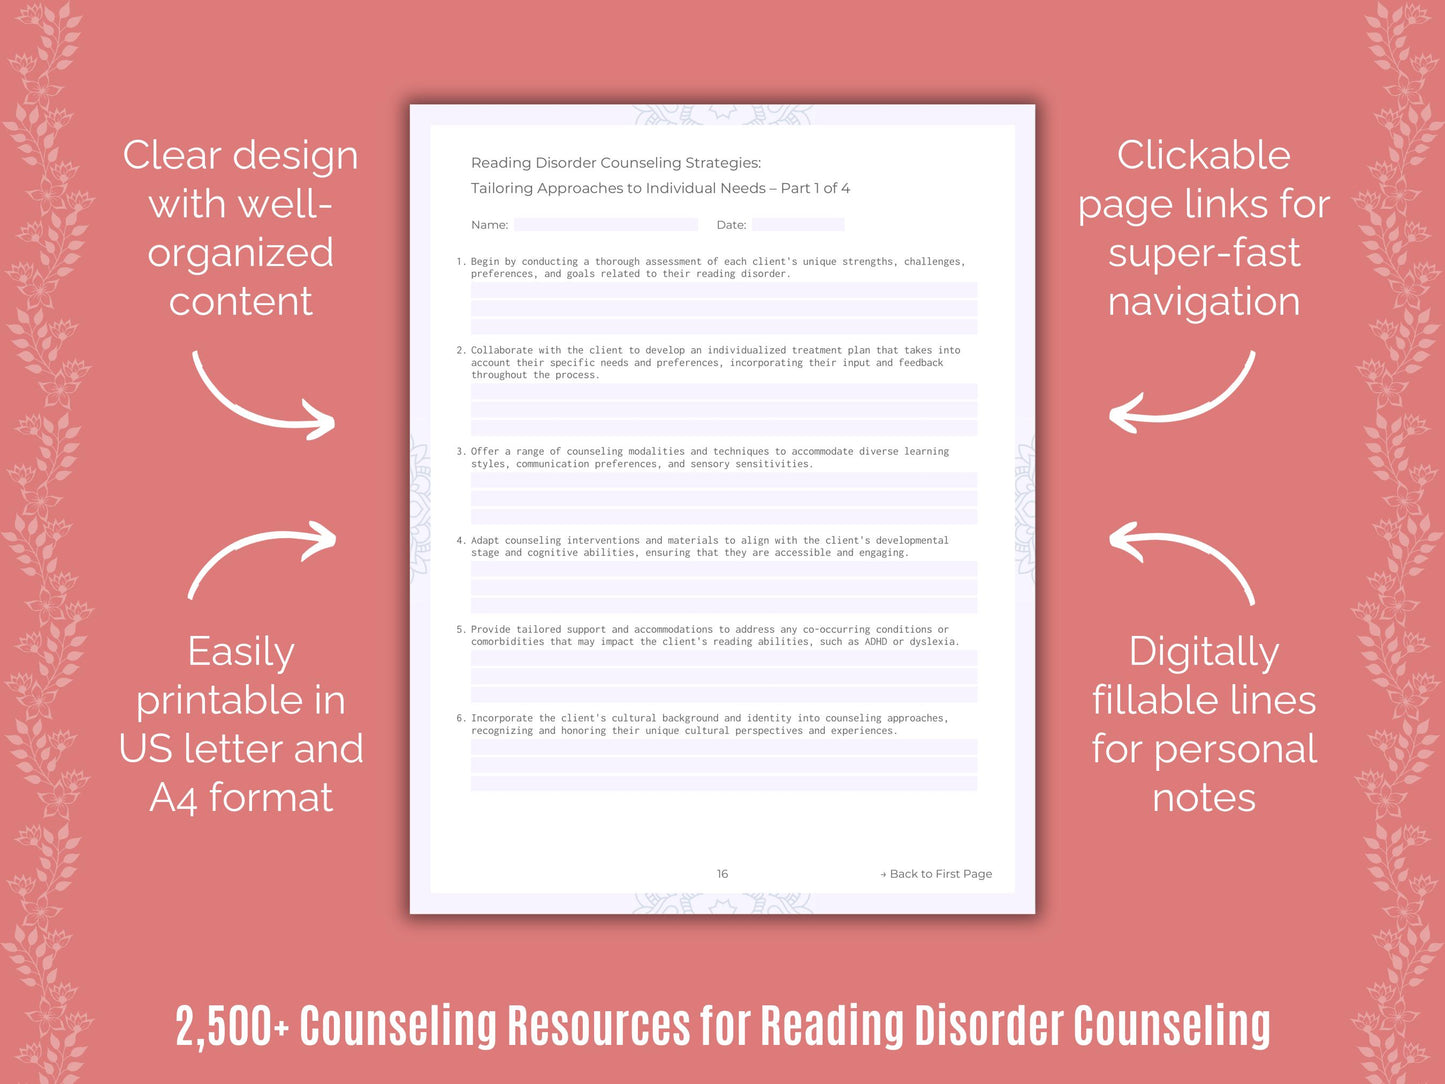 Reading Template, Counselor, Reading Bundle, Reading Workbook, Dyslexia, Reading Resource, Mental Health, Reading Therapy, Therapist, Reading Worksheet, Reading Counseling, Disorder, Reading Idea